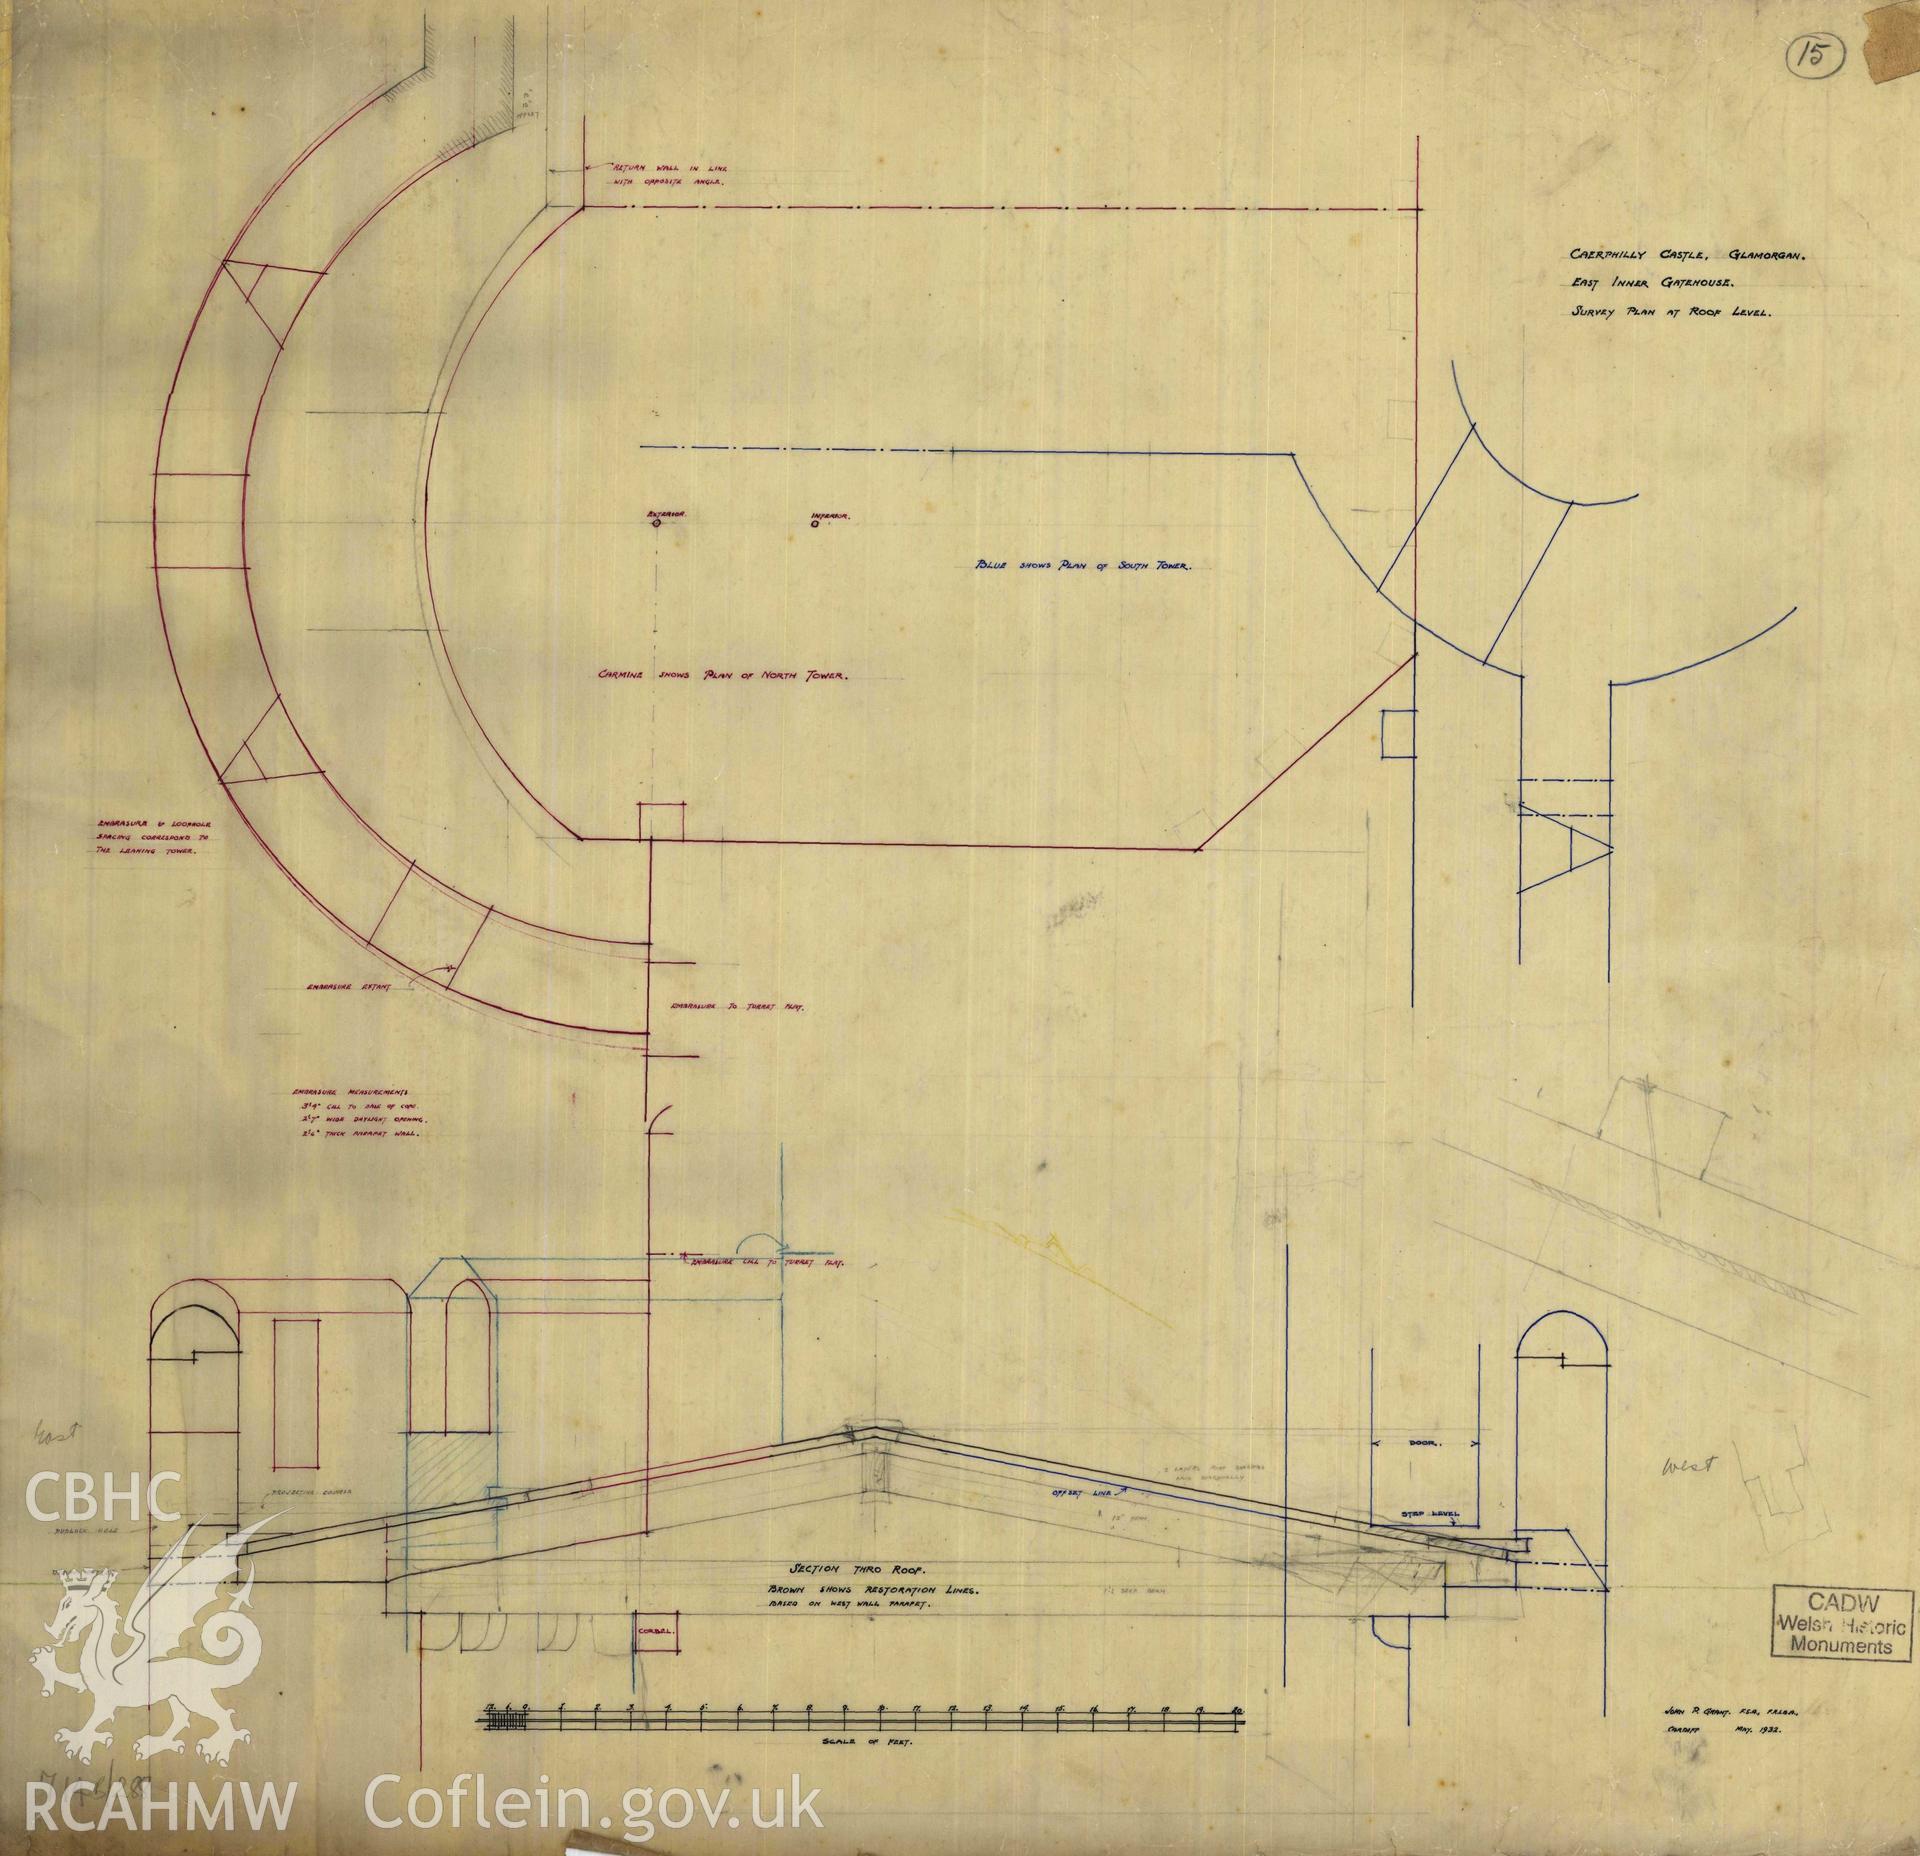 Cadw guardianship monument drawing of Caerphilly Castle. Inner E gate, roof level survey. Cadw Ref. No:714B/288. Scale 1:24.